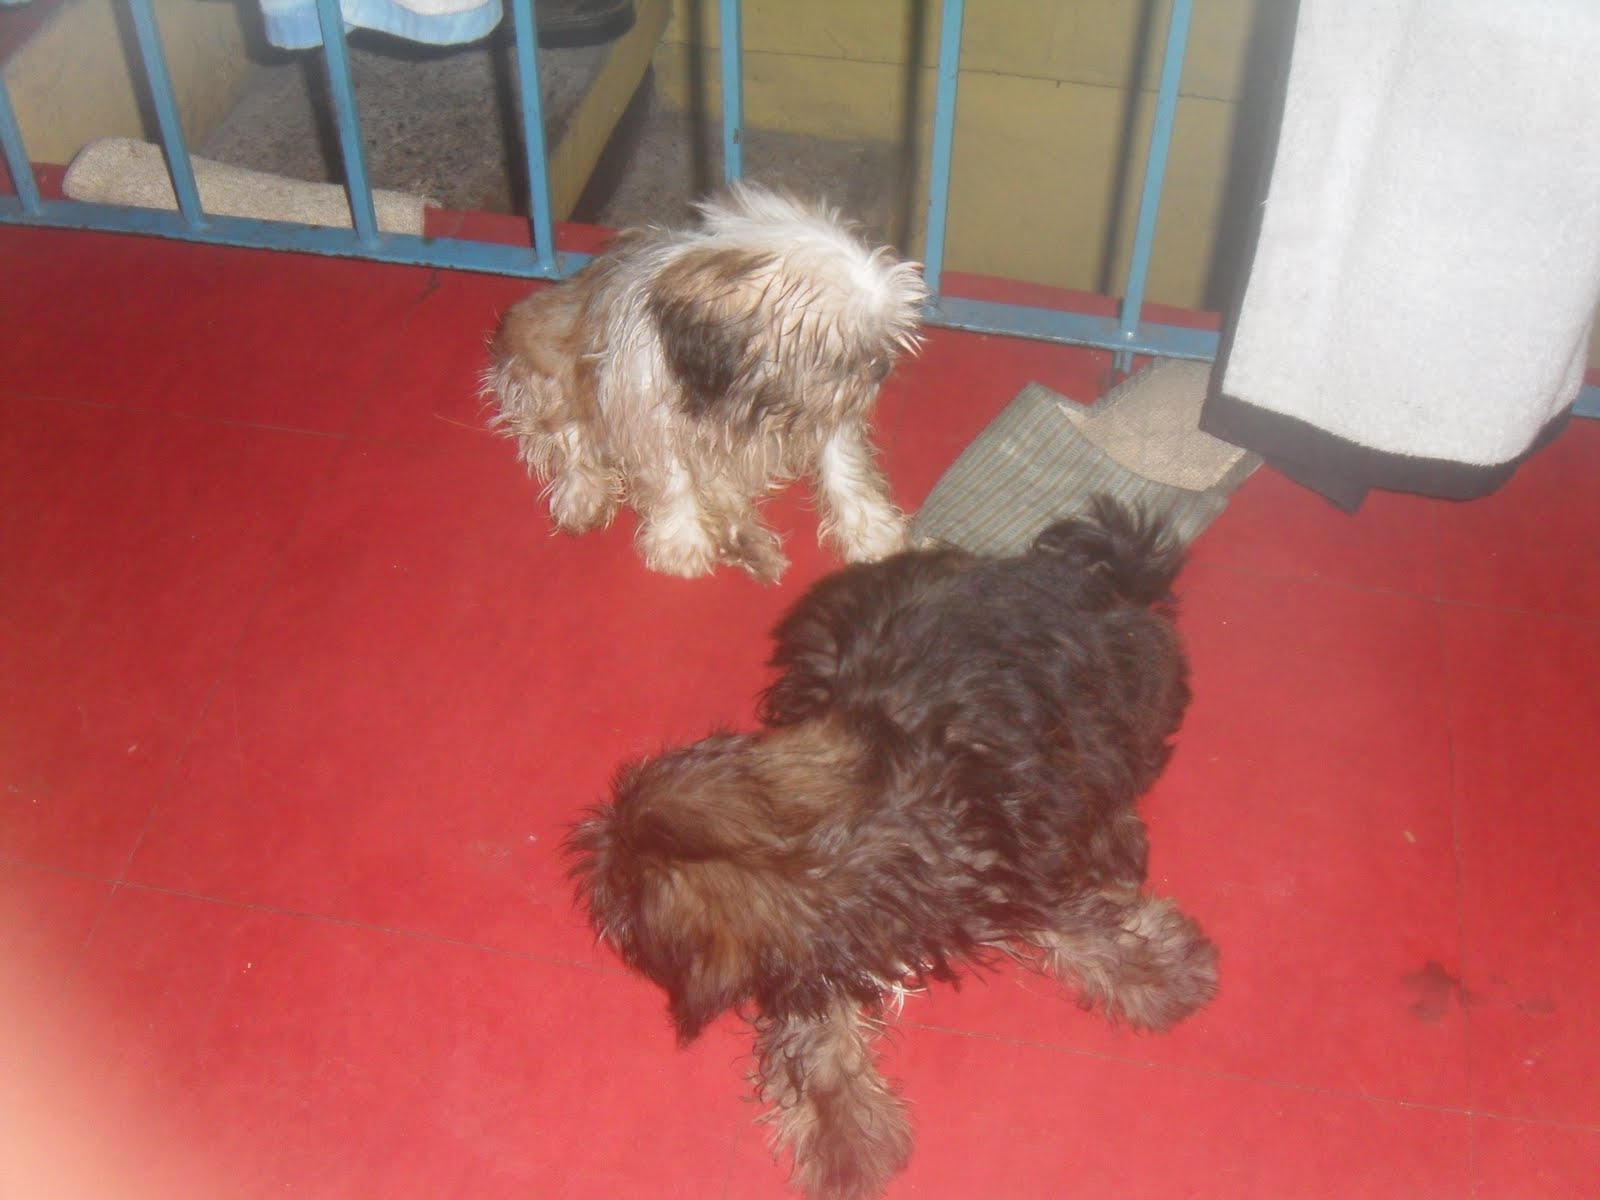 Dogs (Shih Tzus and a Labrador) in Makati City, Philippines: August 2010